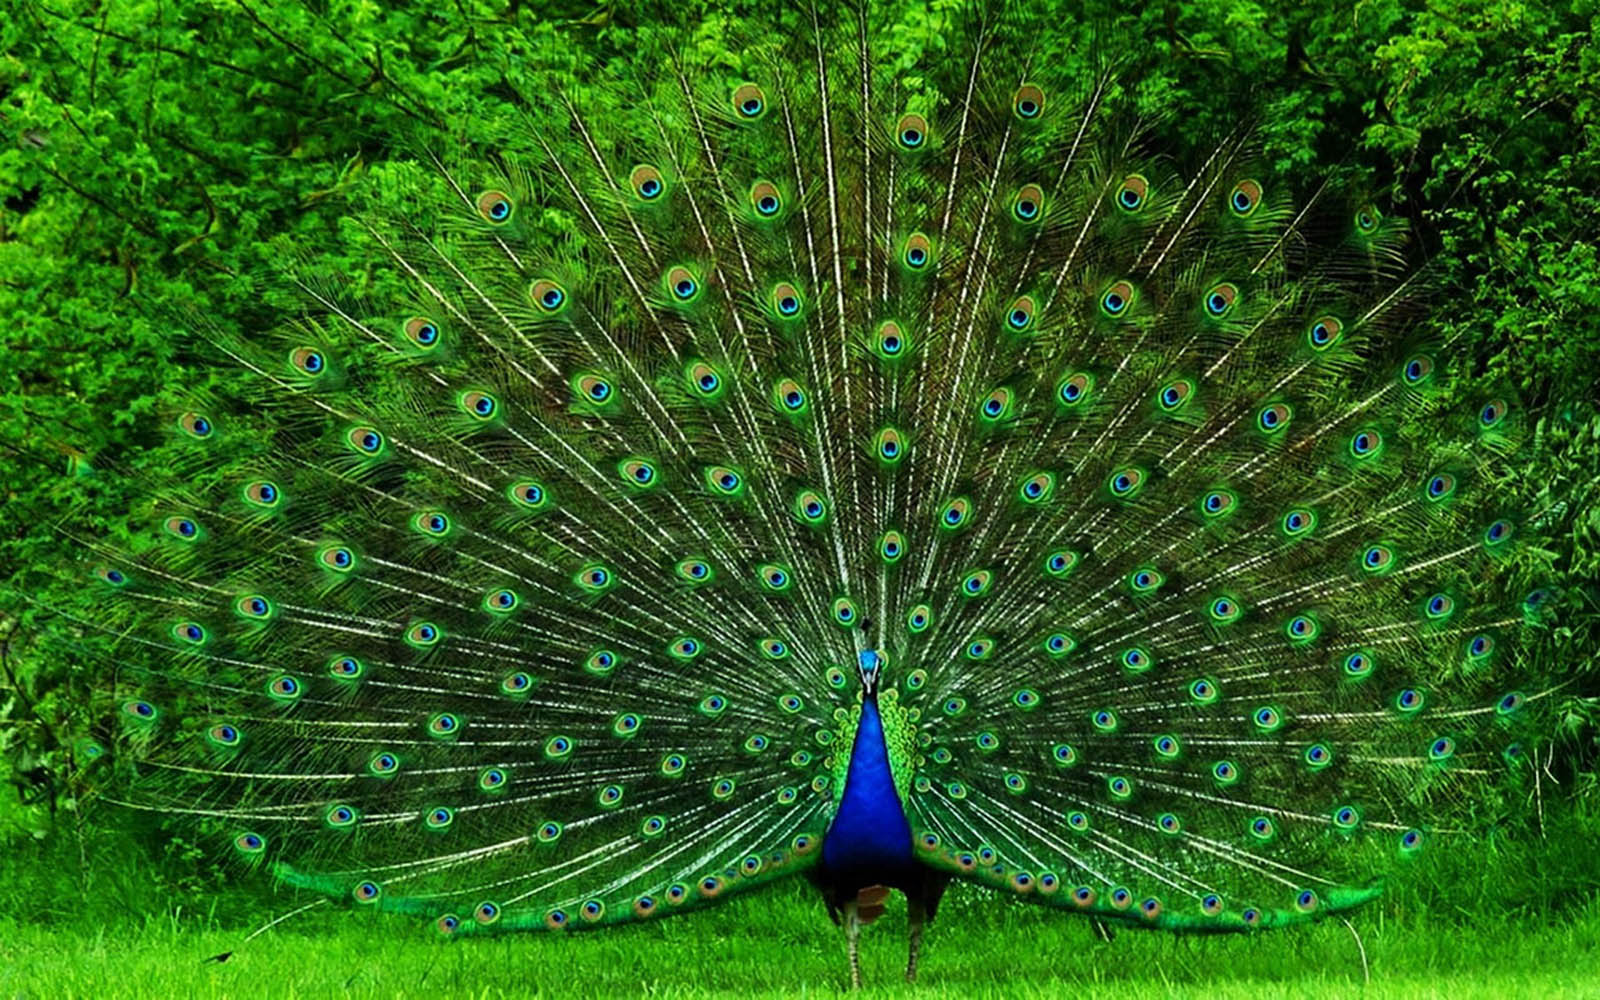 Peacock Wallpaper Background Photos Image And Pictures For